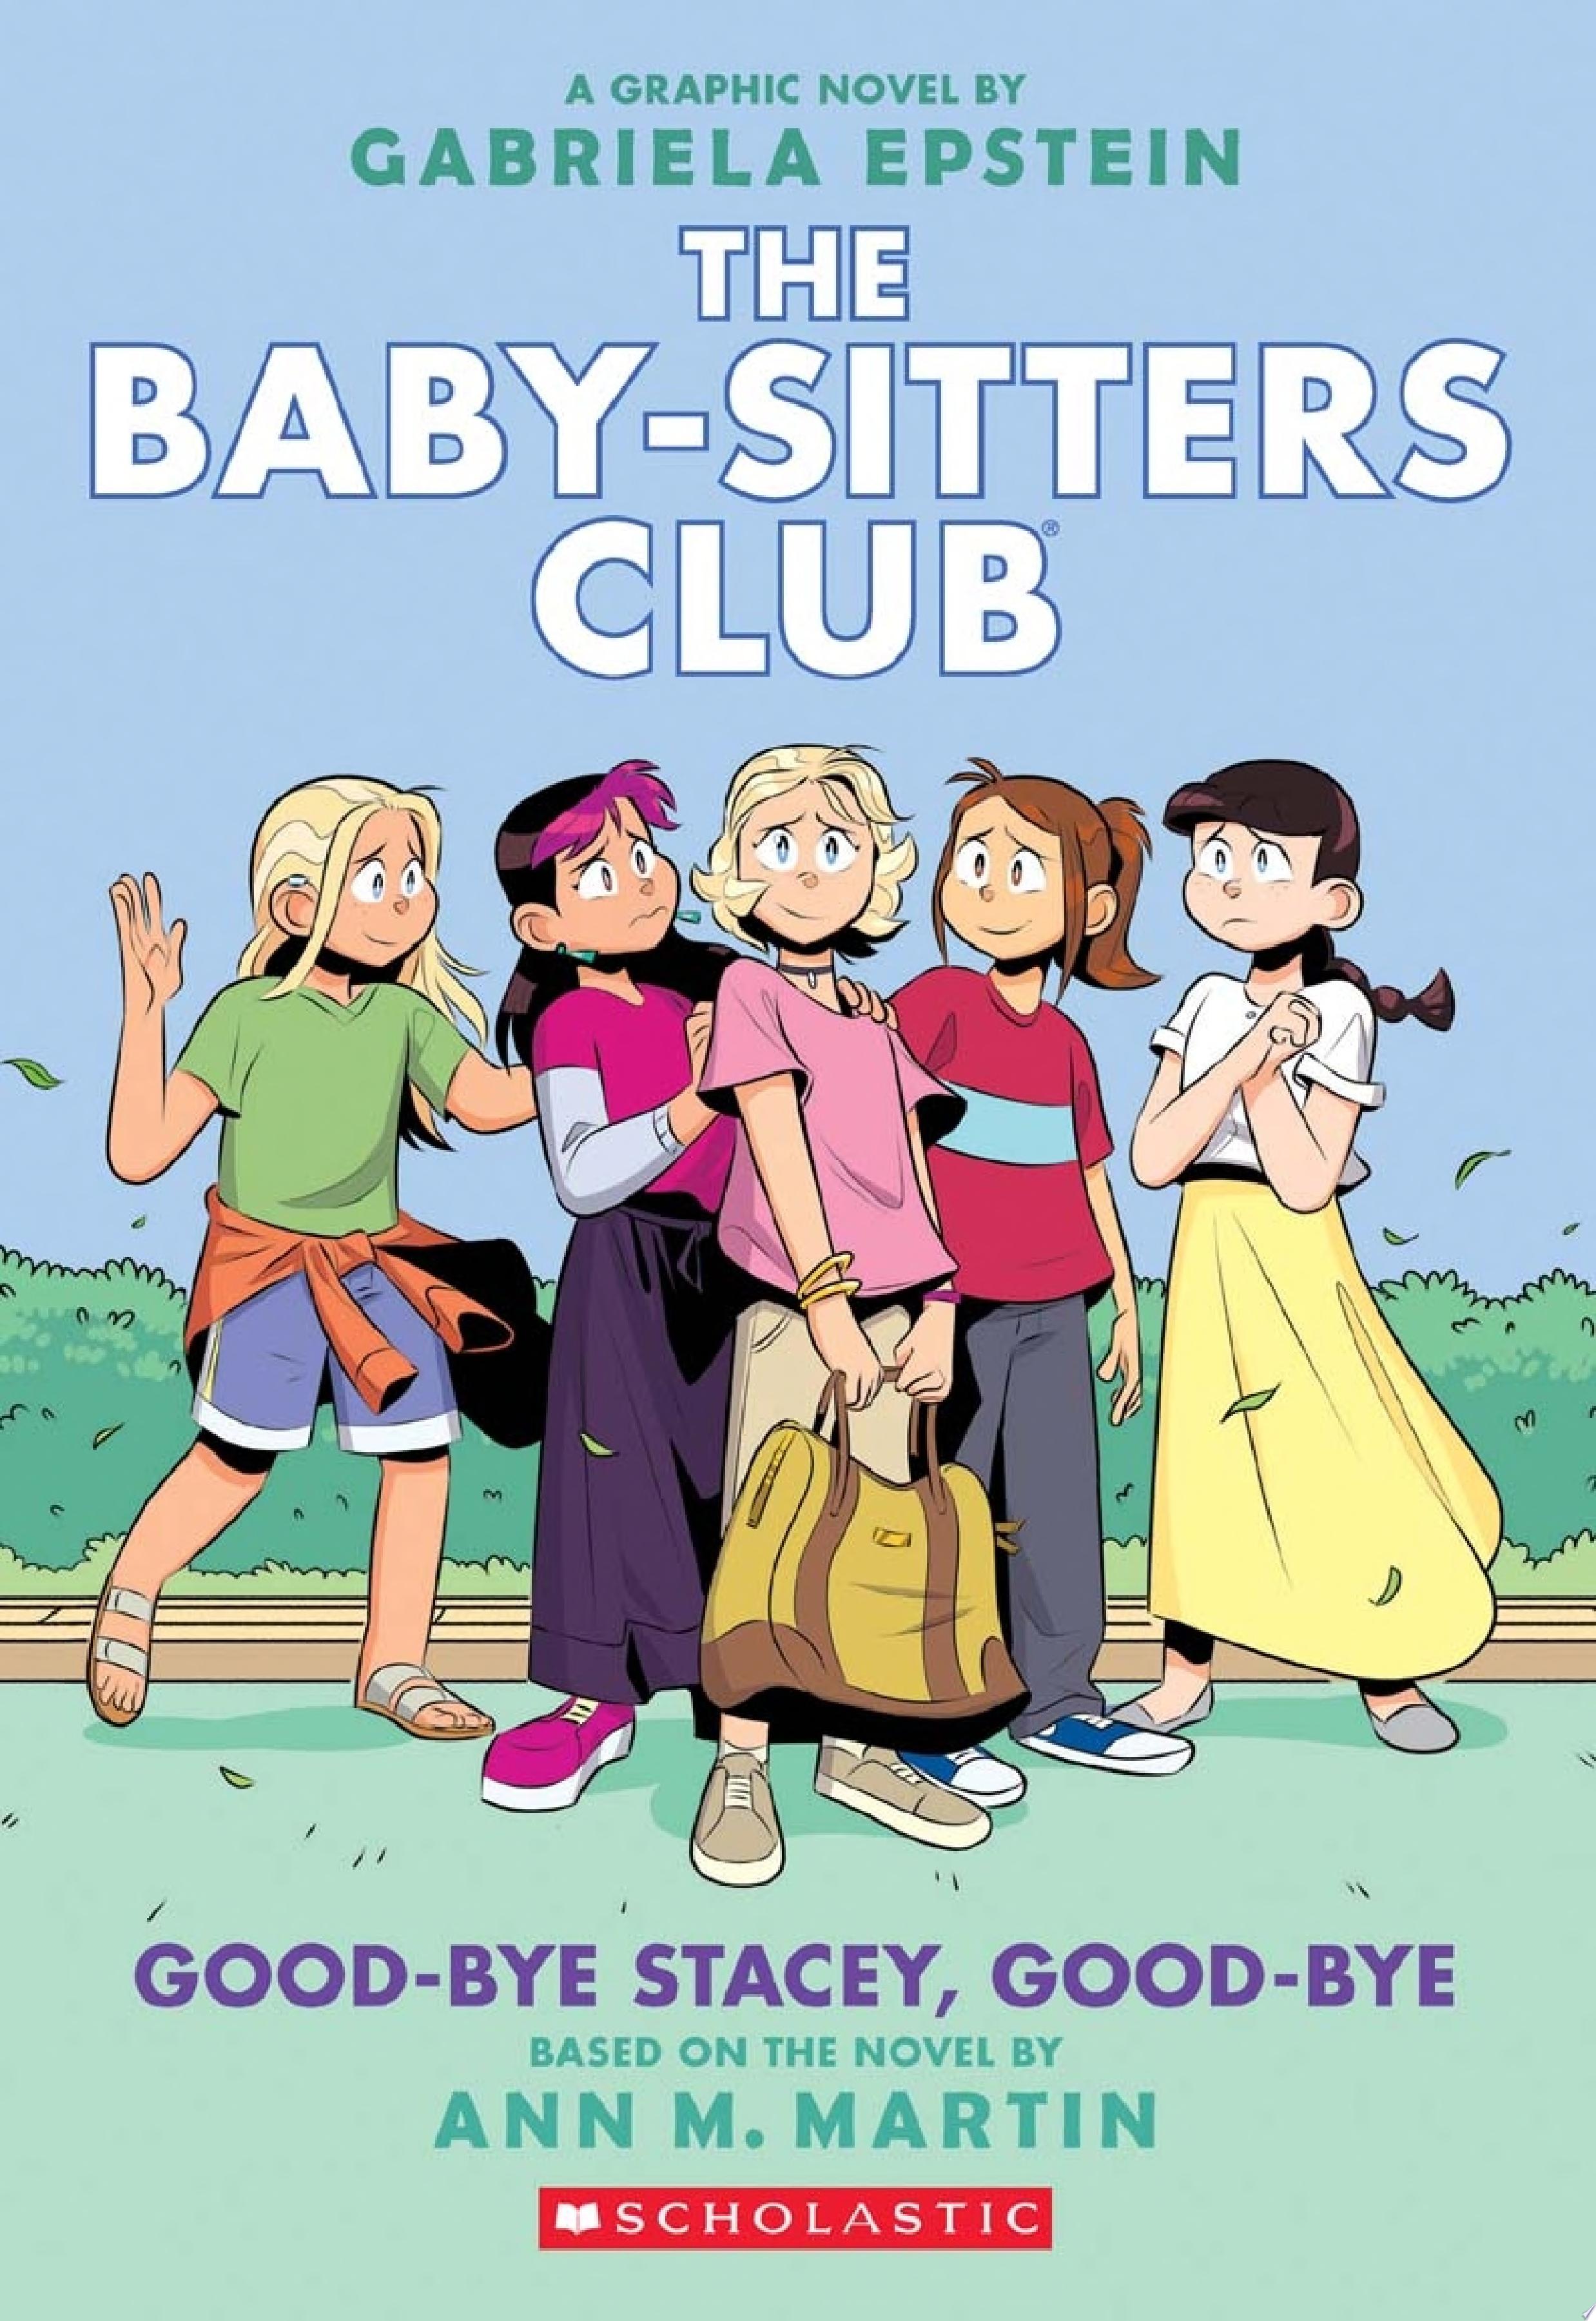 Image for "Good-bye Stacey, Good-bye: A Graphic Novel (The Baby-sitters Club #11) (Adapted edition)"